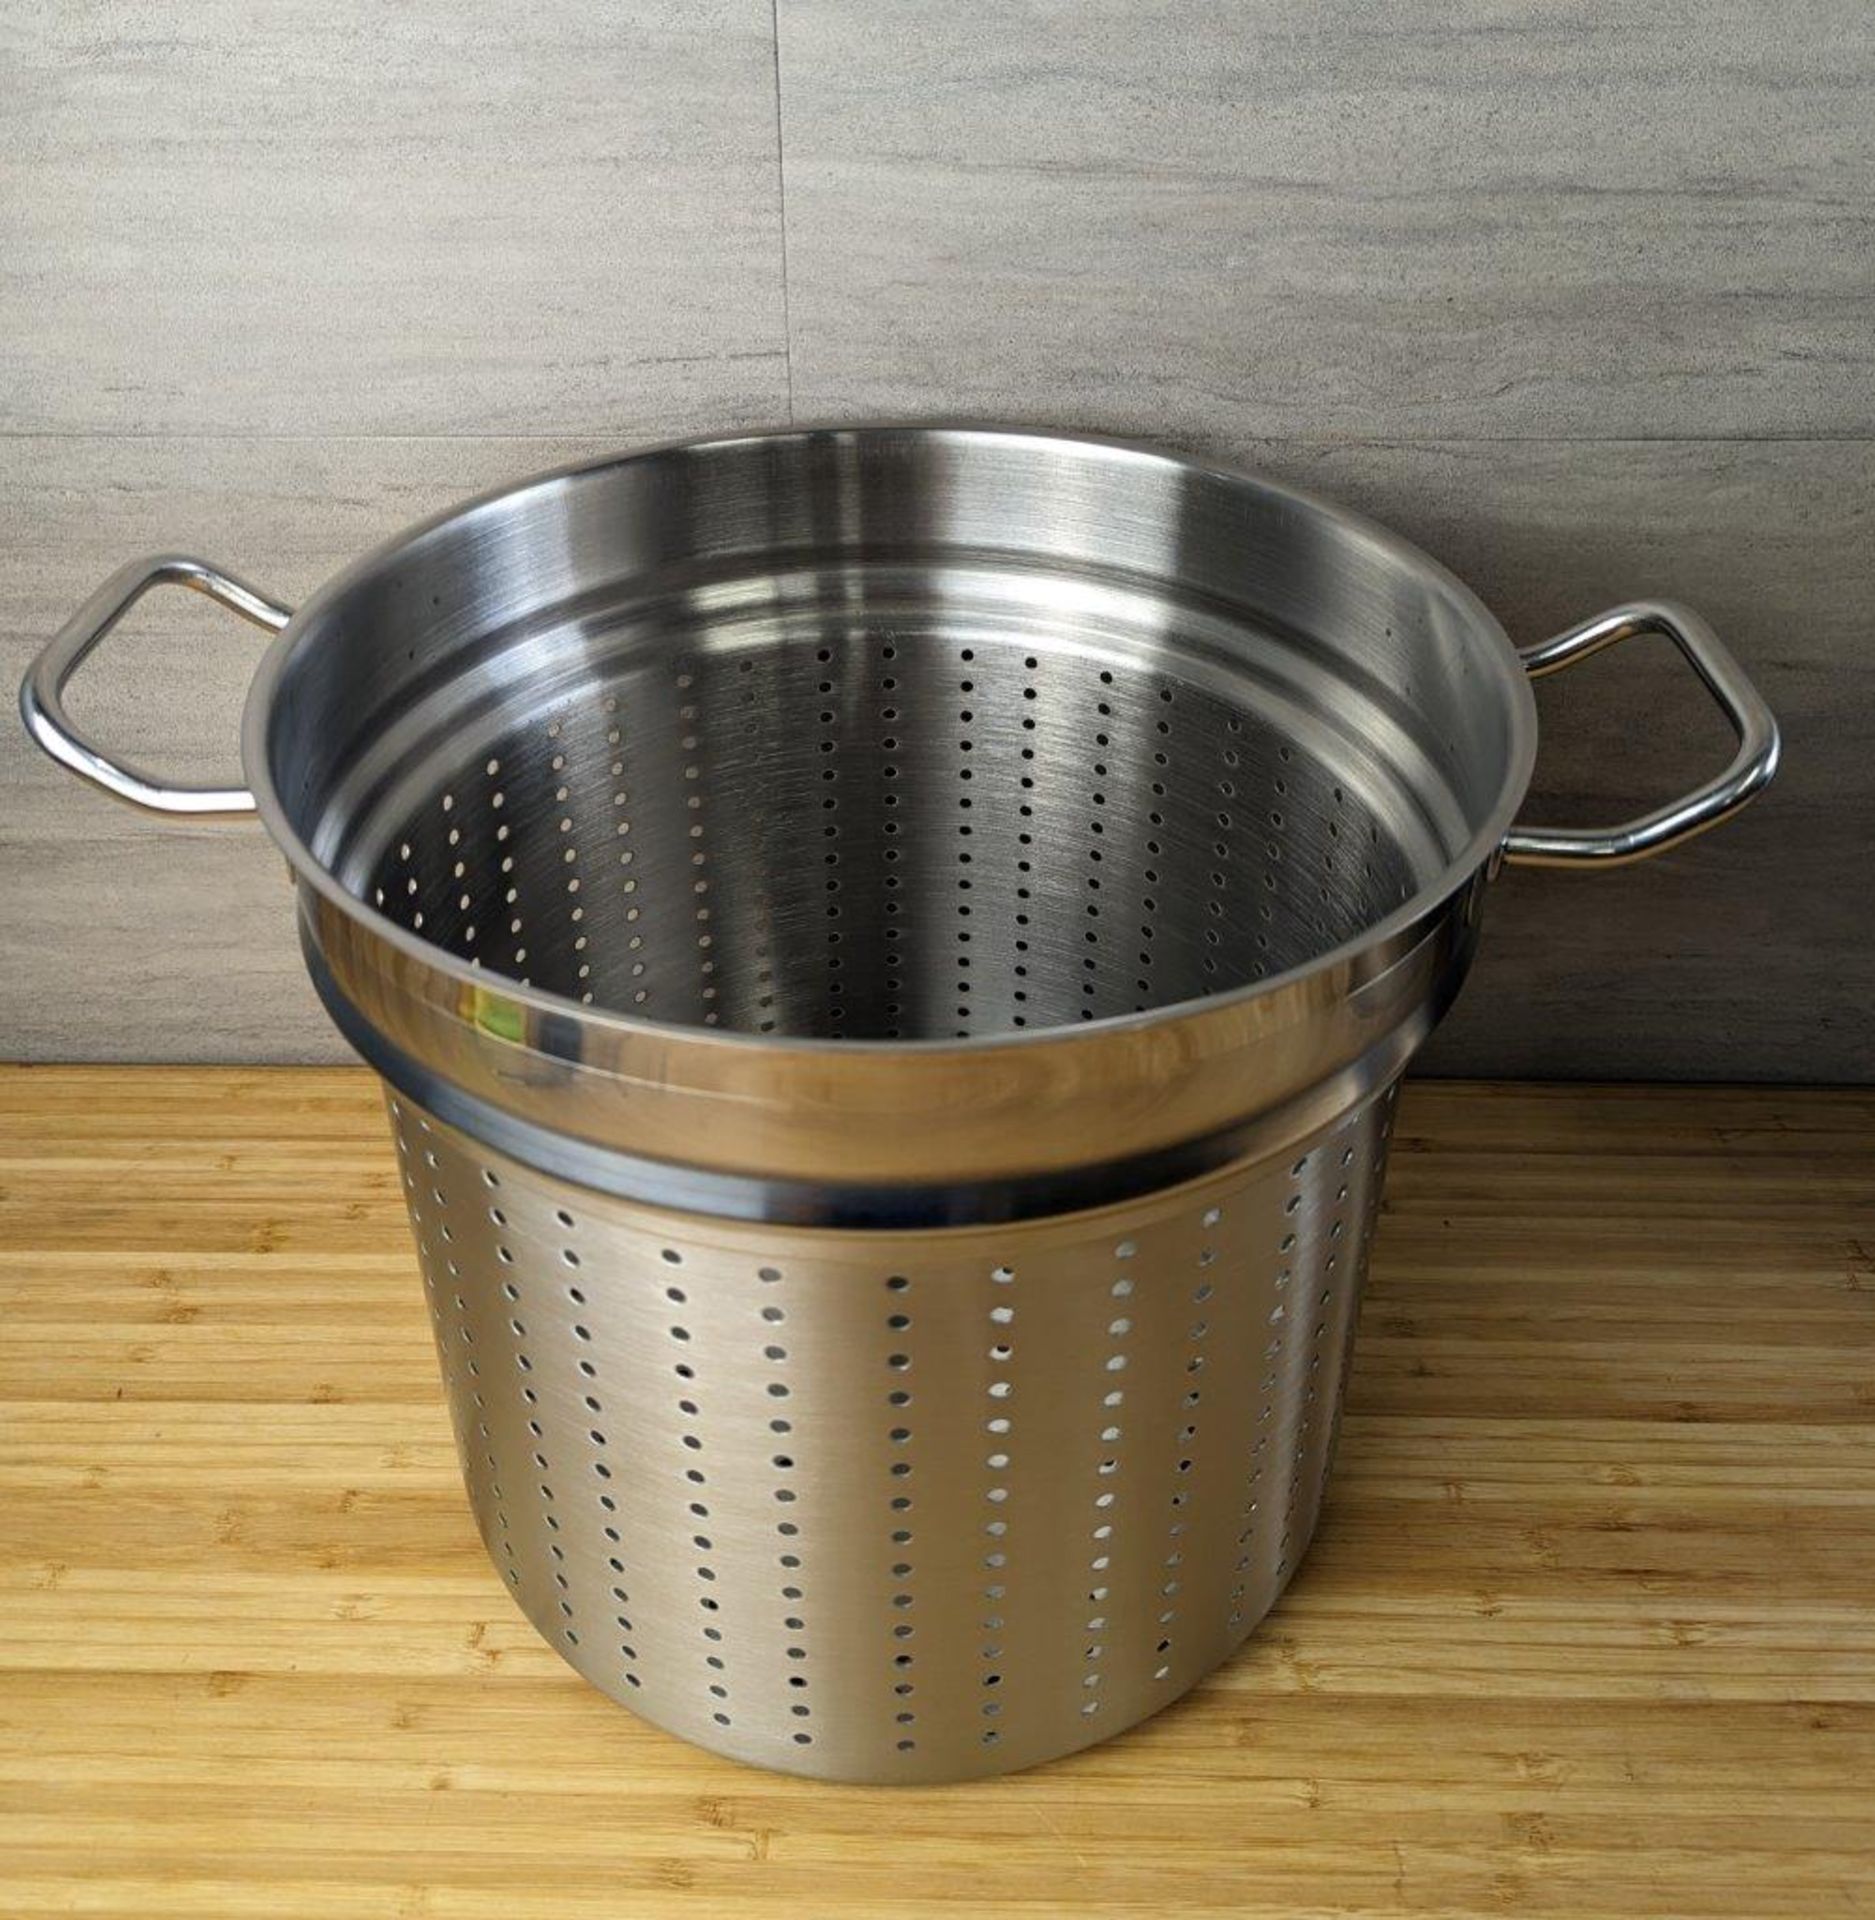 24QT STOCK POT AND LID WITH STEAM INSERT, INDUCTION CAPABLE - LOT OF 3 PIECES - Image 5 of 5